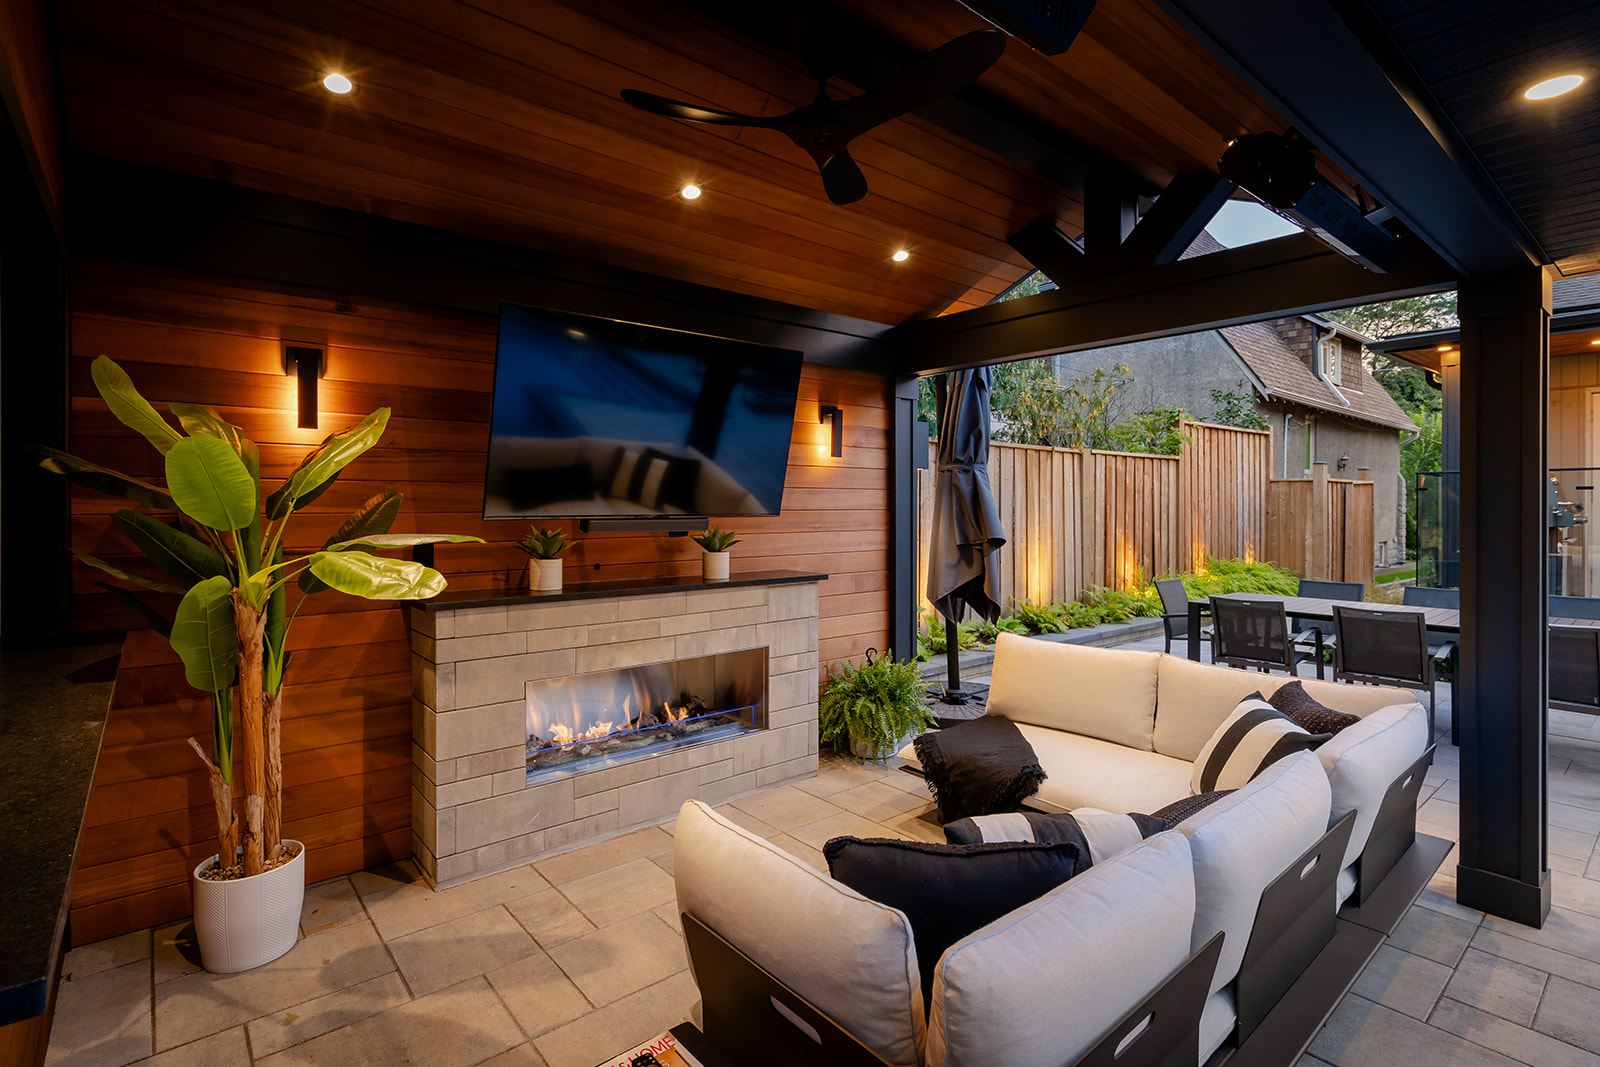 An outdoor furniture set with cushions and a tv mounted to the wall.